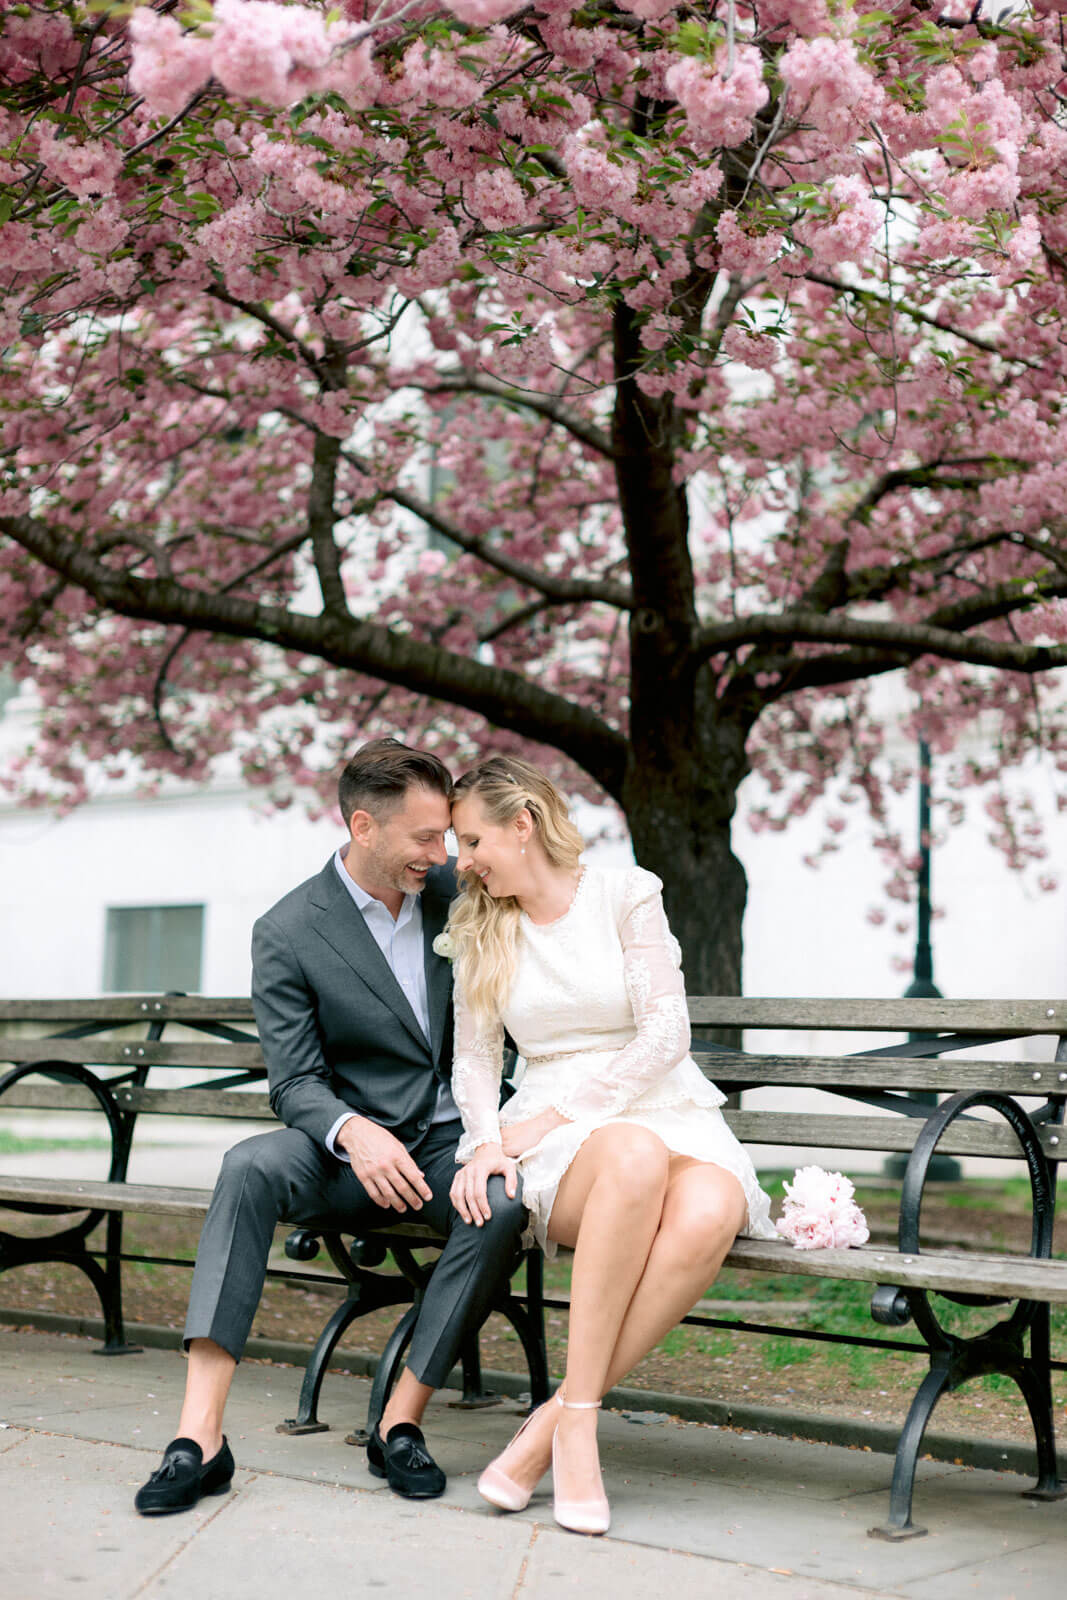 The bride and the groom are sitting on a bench in the park with a cherry blossom tree in the background.